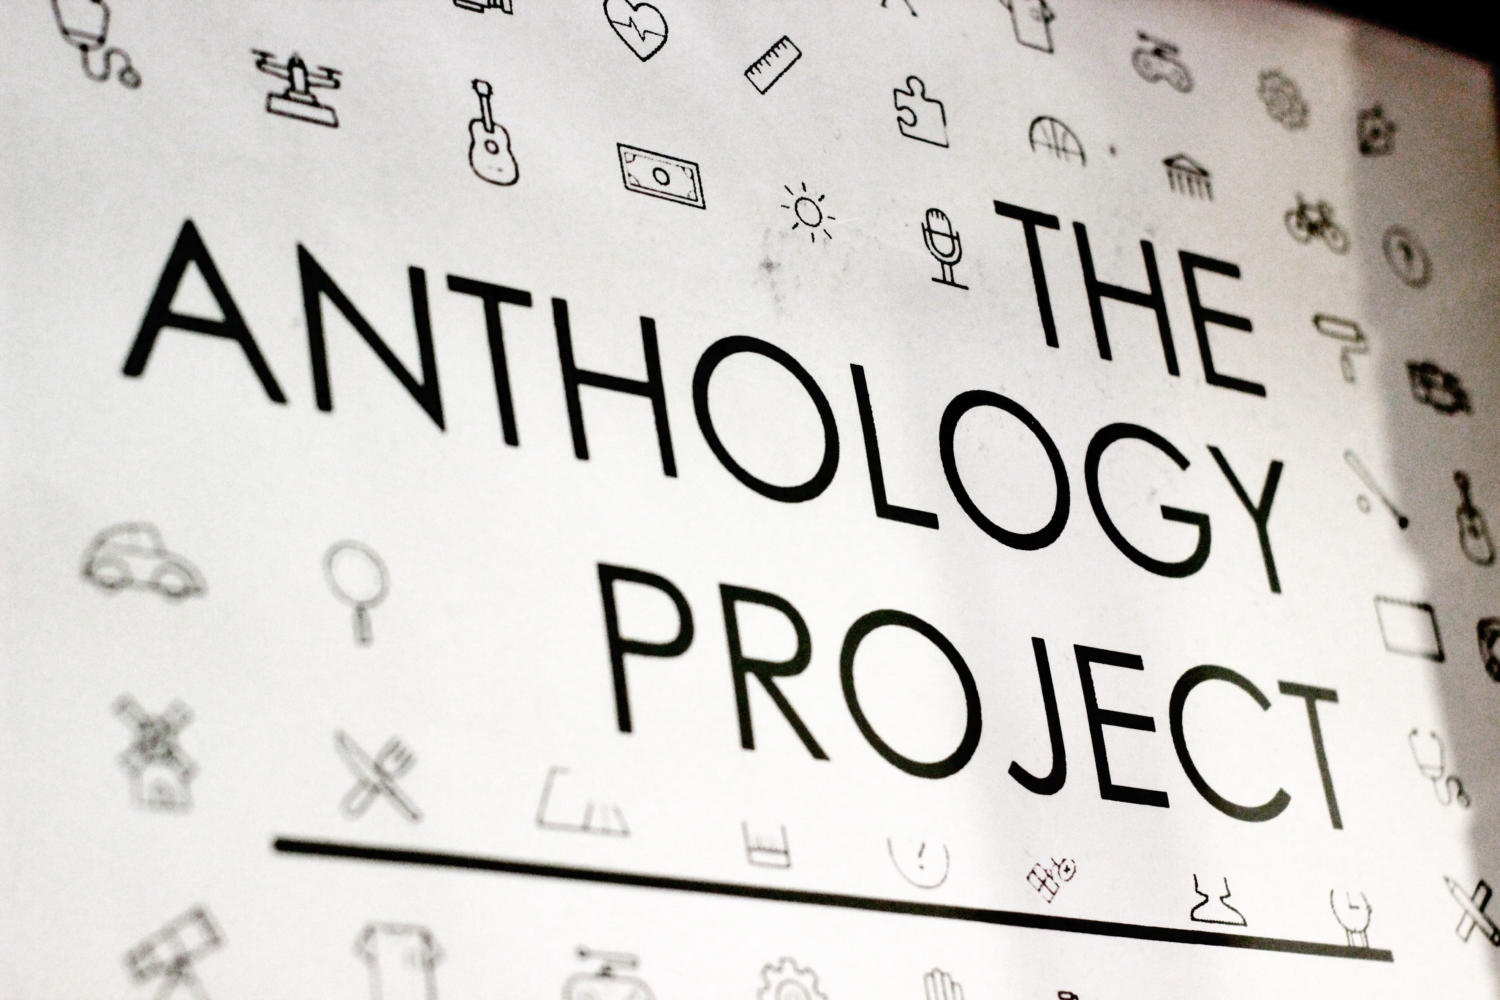 Anthology Project promotes creativity from students